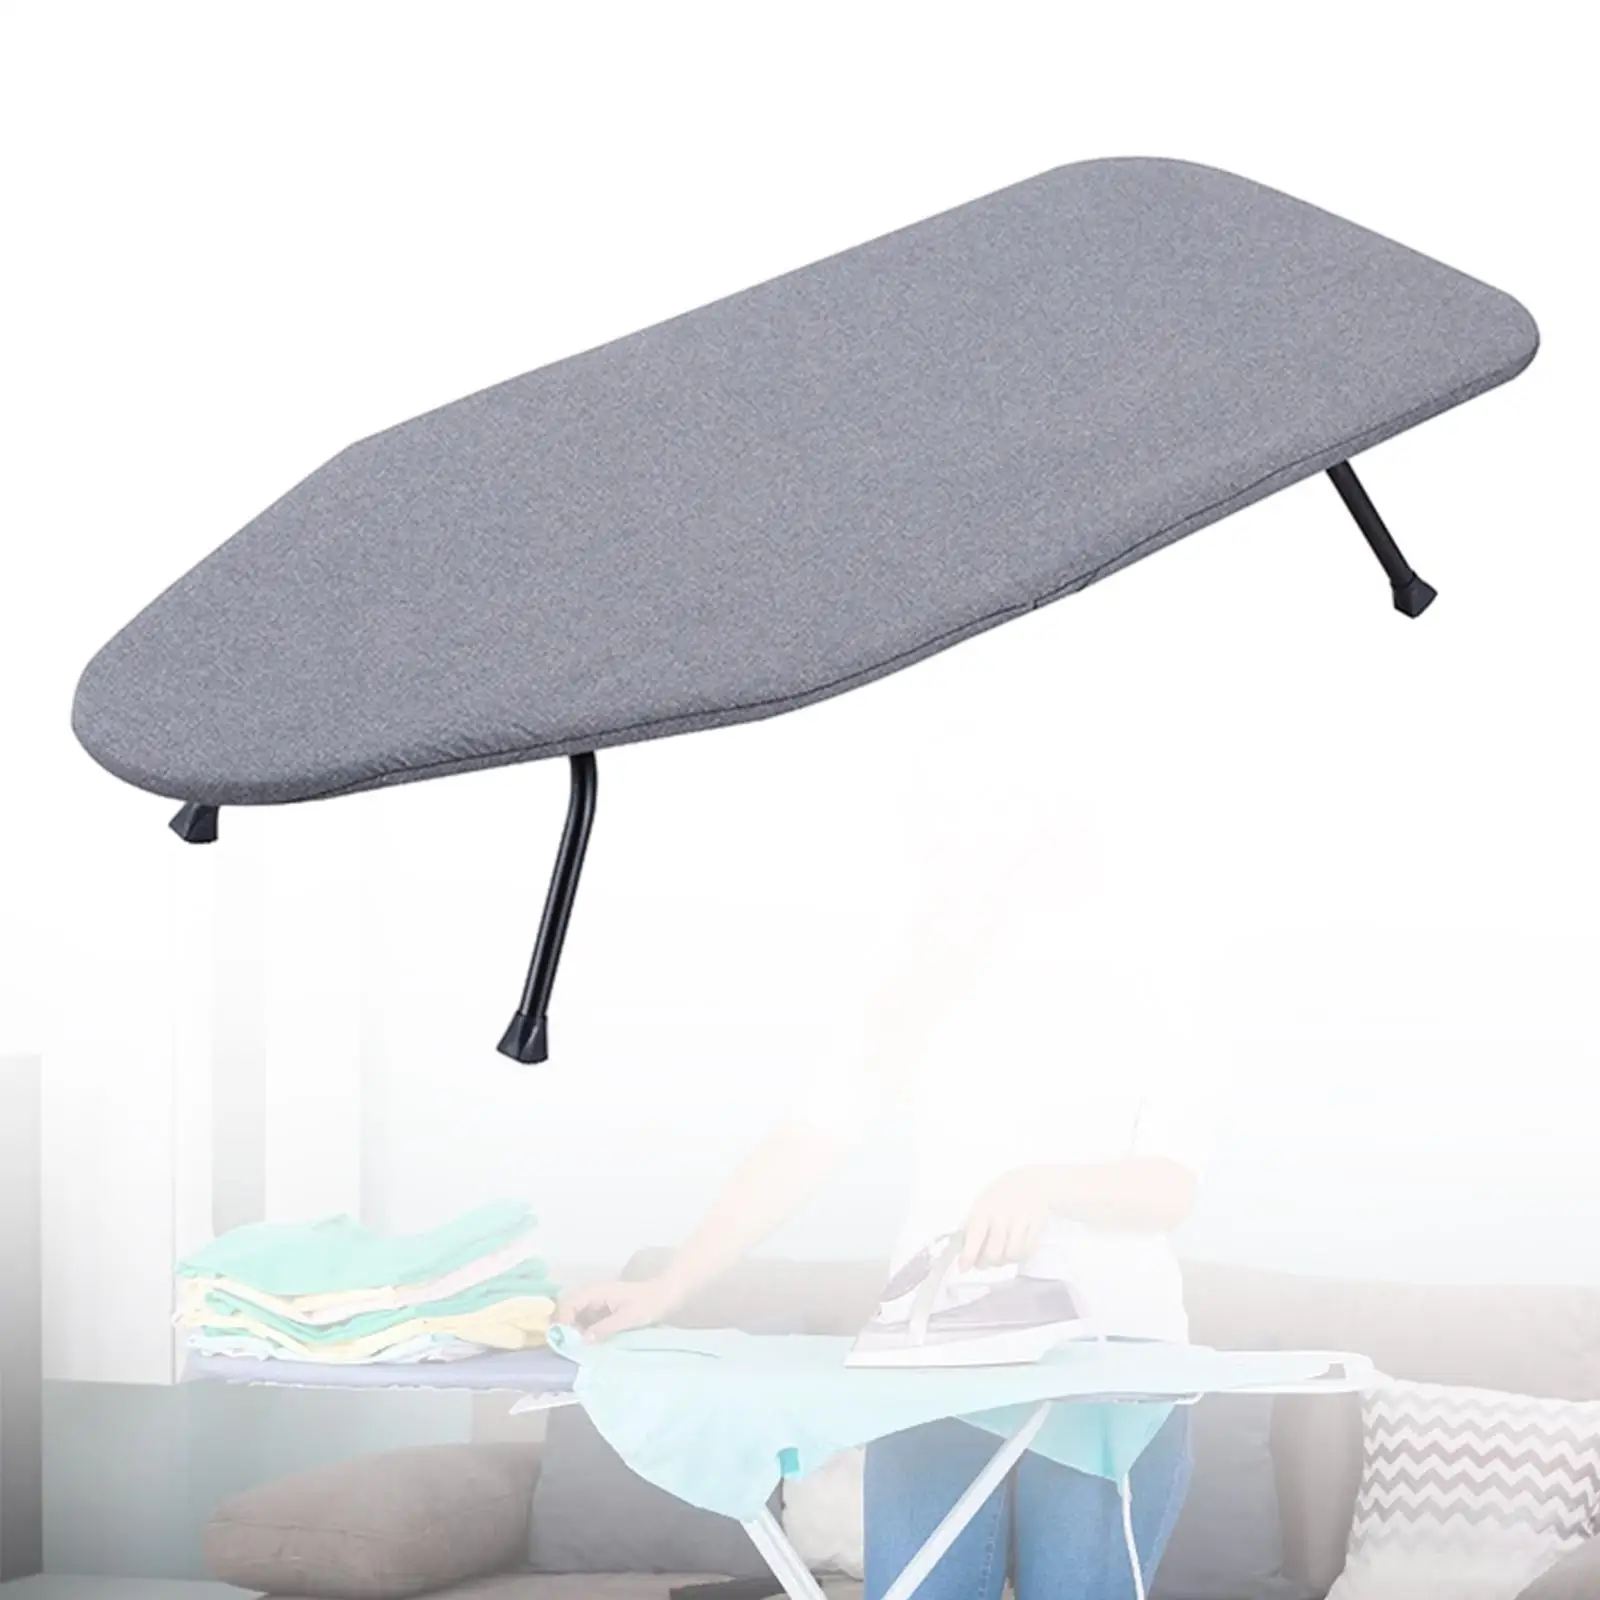 Tabletop Ironing Board Heavy Duty Ironing Table with Folding Legs Foldable Ironing Board for Household Dorm Sewing Craft Room